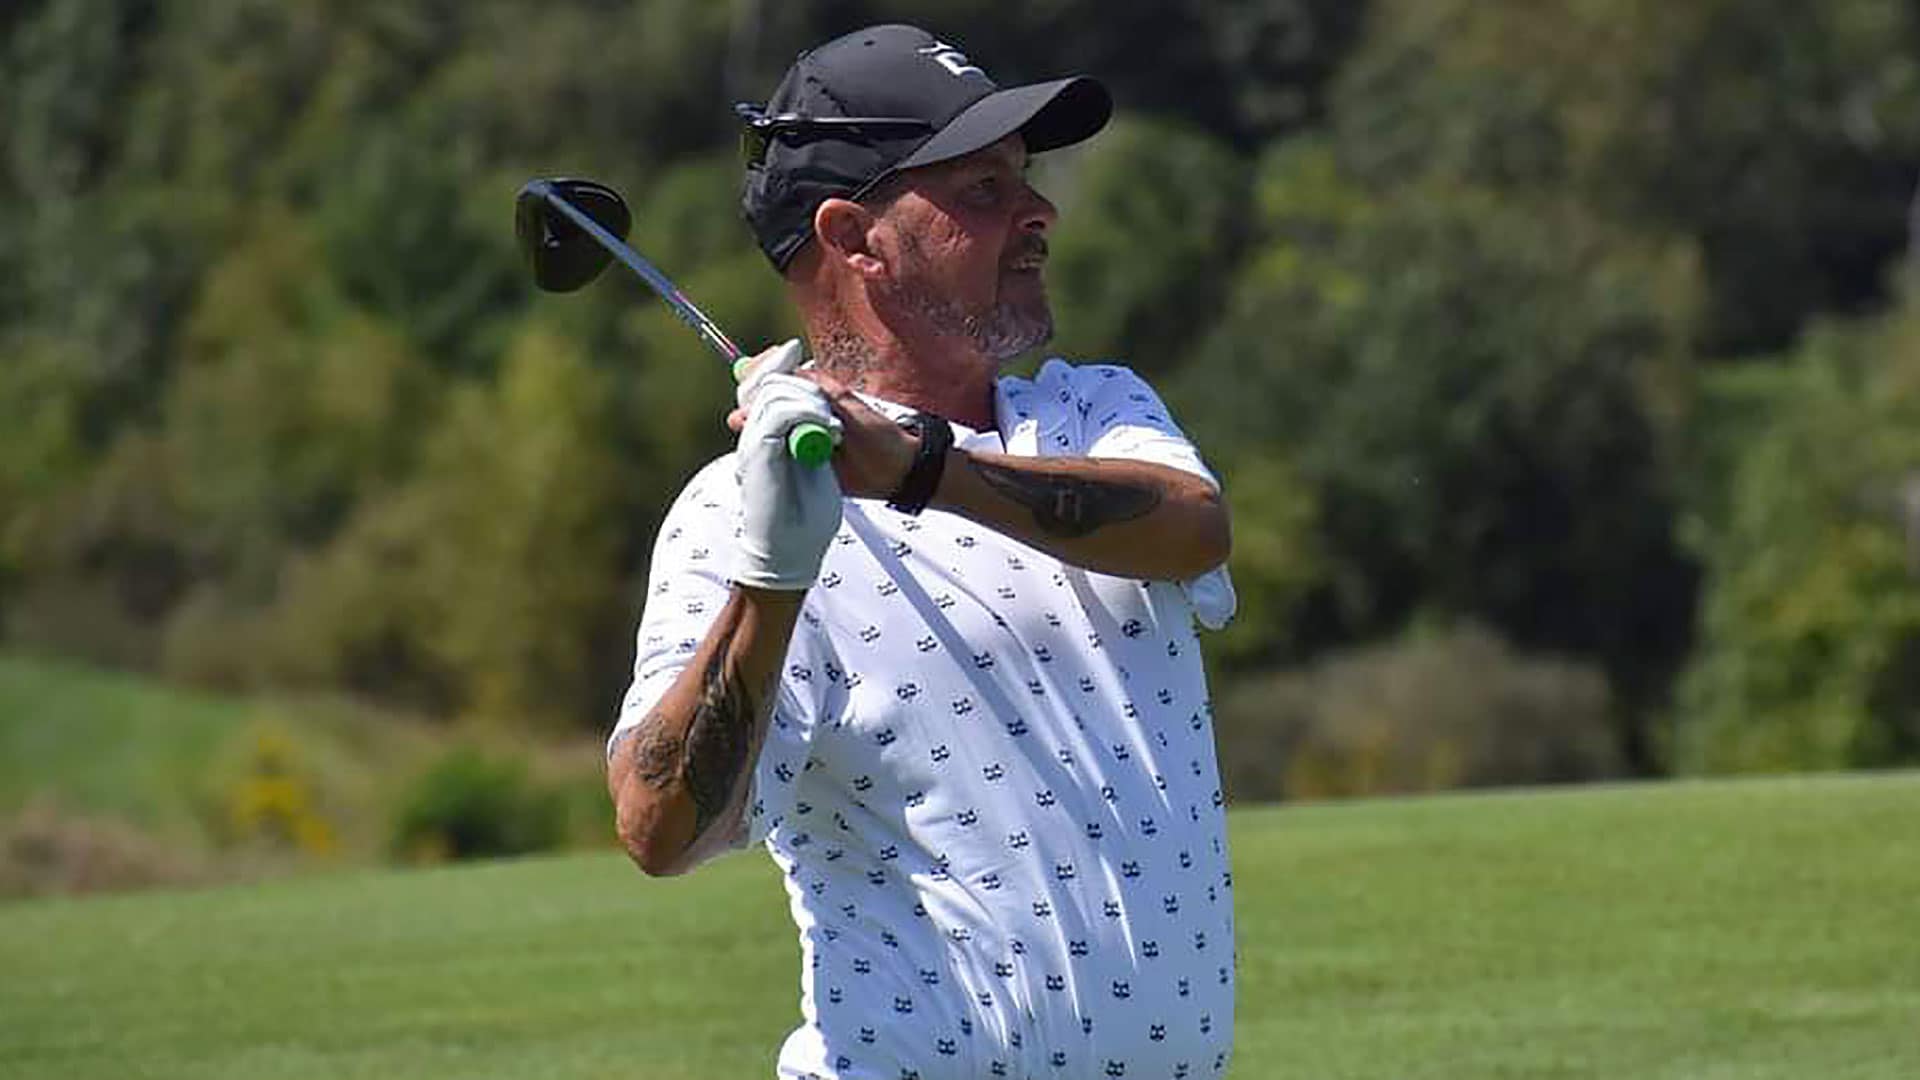 Pro Brian Morris, Diagnosed with Brain Cancer, on PGA Tour Debut: ‘It Means a Lot’